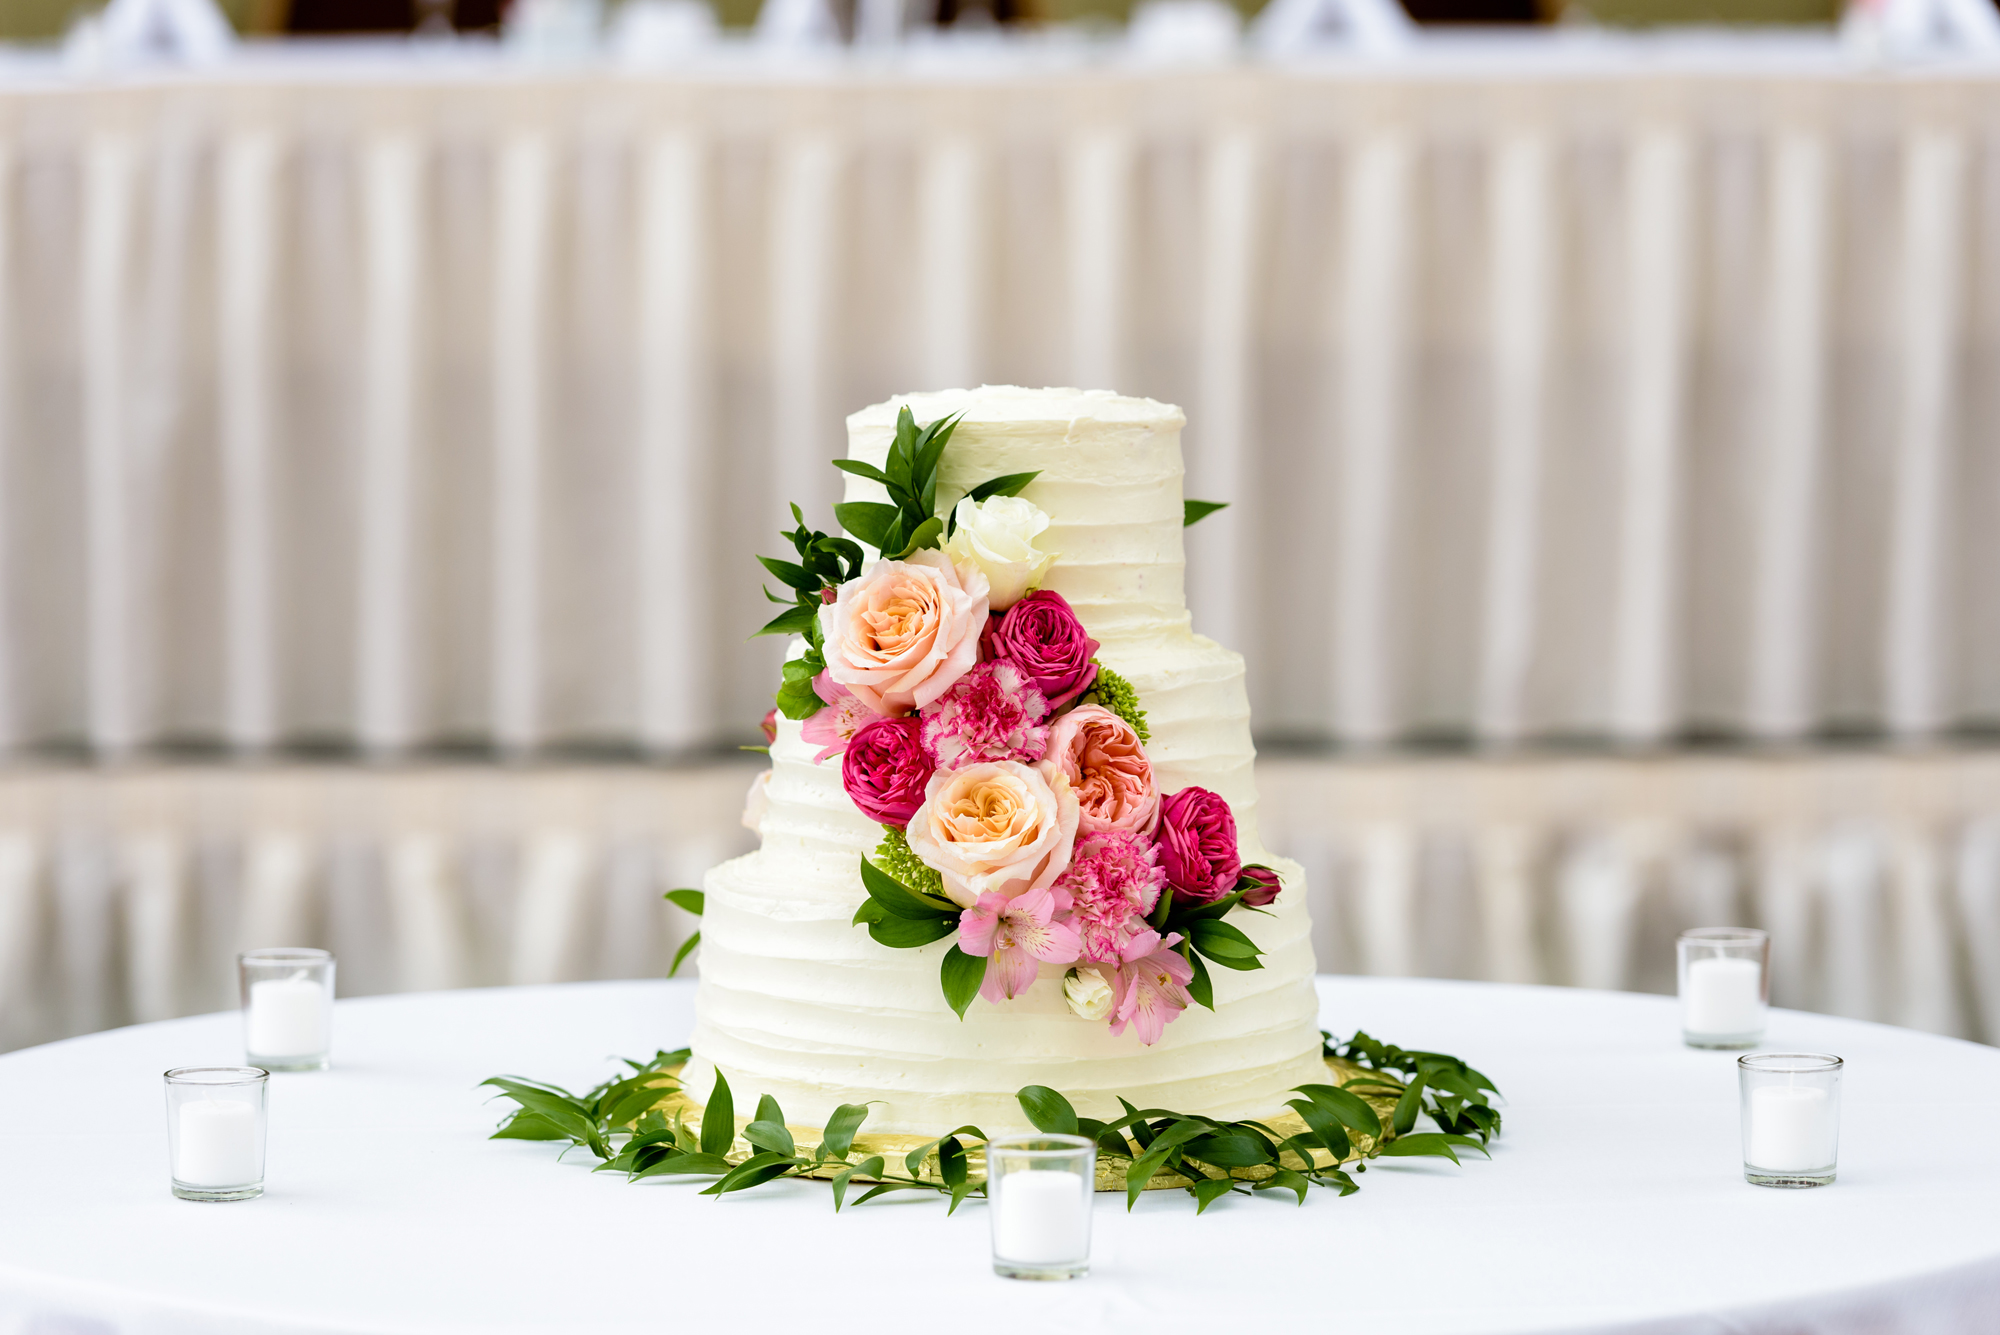 Wedding Reception details at the DoubleTree by Hilton